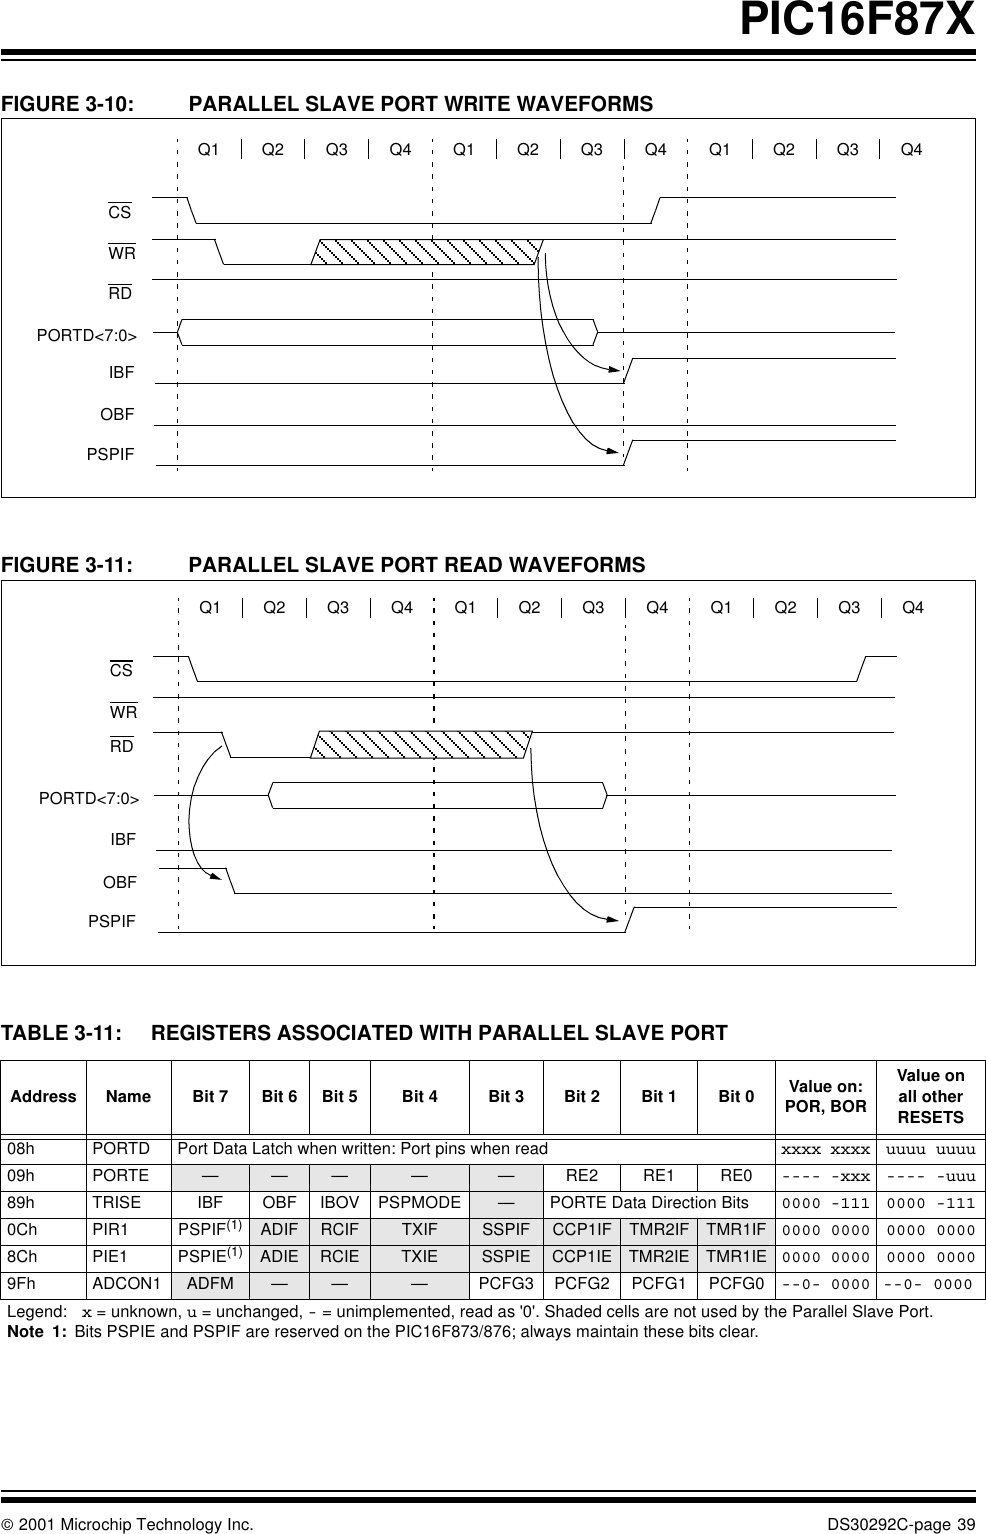  2001 Microchip Technology Inc. DS30292C-page 39PIC16F87XFIGURE 3-10: PARALLEL SLAVE PORT WRITE WAVEFORMS  FIGURE 3-11: PARALLEL SLAVE PORT READ WAVEFORMS  TABLE 3-11: REGISTERS ASSOCIATED WITH PARALLEL SLAVE PORTQ1 Q2 Q3 Q4CSQ1 Q2 Q3 Q4 Q1 Q2 Q3 Q4WRRDIBFOBFPSPIFPORTD&lt;7:0&gt;Q1 Q2 Q3 Q4CSQ1 Q2 Q3 Q4 Q1 Q2 Q3 Q4WRIBFPSPIFRDOBFPORTD&lt;7:0&gt;Address Name Bit 7 Bit 6 Bit 5 Bit 4 Bit 3 Bit 2 Bit 1 Bit 0 Value on: POR, BORValue on all other RESETS08h PORTD Port Data Latch when written: Port pins when read xxxx xxxx uuuu uuuu09h PORTE — — — — — RE2 RE1 RE0 ---- -xxx ---- -uuu89h TRISE IBF OBF IBOV PSPMODE —PORTE Data Direction Bits 0000 -111 0000 -1110Ch PIR1 PSPIF(1) ADIF RCIF TXIF SSPIF CCP1IF TMR2IF TMR1IF 0000 0000 0000 00008Ch PIE1 PSPIE(1) ADIE RCIE TXIE SSPIE CCP1IE TMR2IE TMR1IE 0000 0000 0000 00009Fh ADCON1 ADFM — — — PCFG3 PCFG2 PCFG1 PCFG0 --0- 0000 --0- 0000Legend: x = unknown, u = unchanged, - = unimplemented, read as &apos;0&apos;. Shaded cells are not used by the Parallel Slave Port.Note 1: Bits PSPIE and PSPIF are reserved on the PIC16F873/876; always maintain these bits clear.